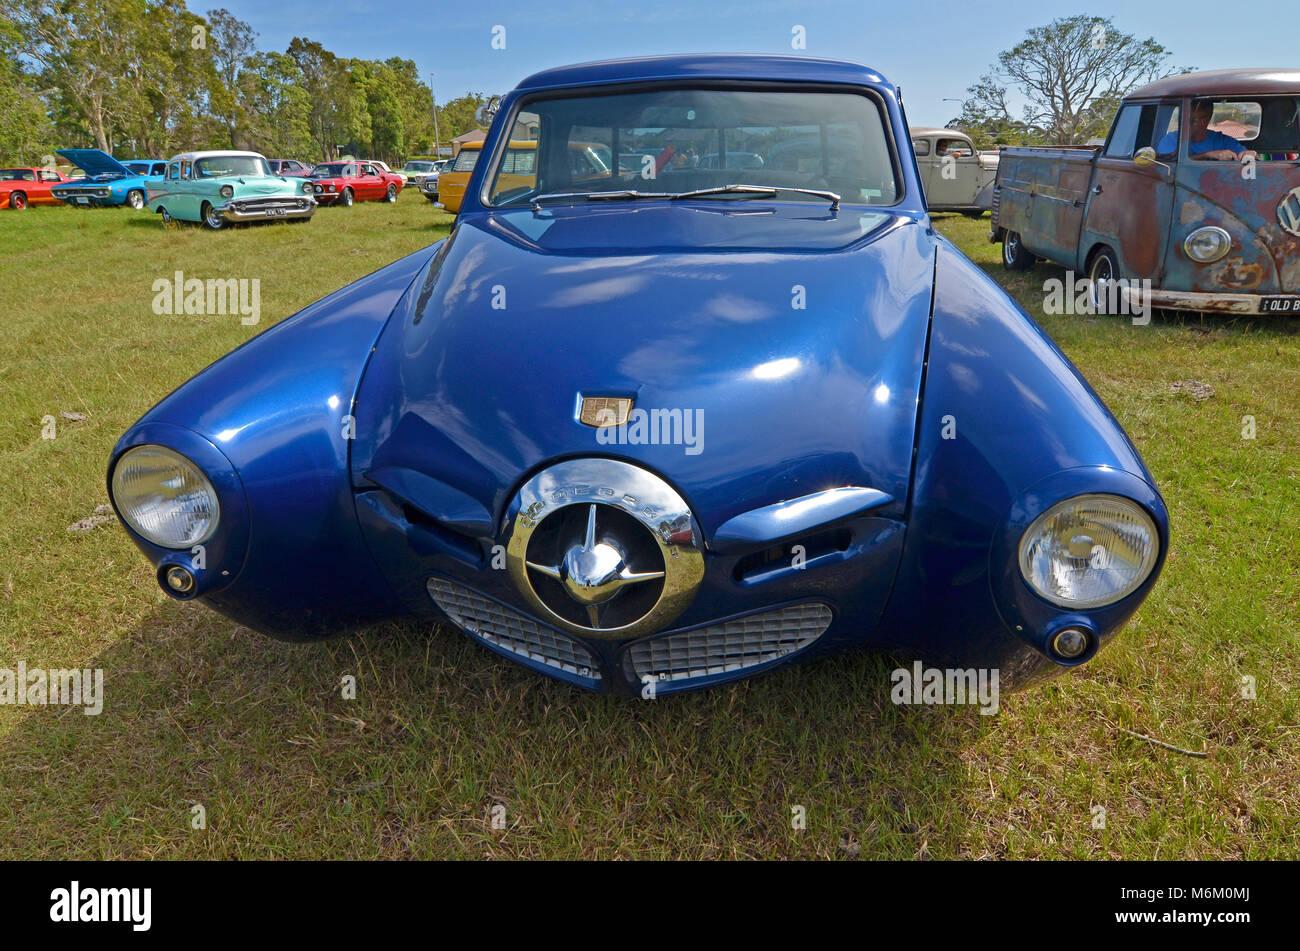 front view of a Studebaker Champion fifties classic car Stock Photo